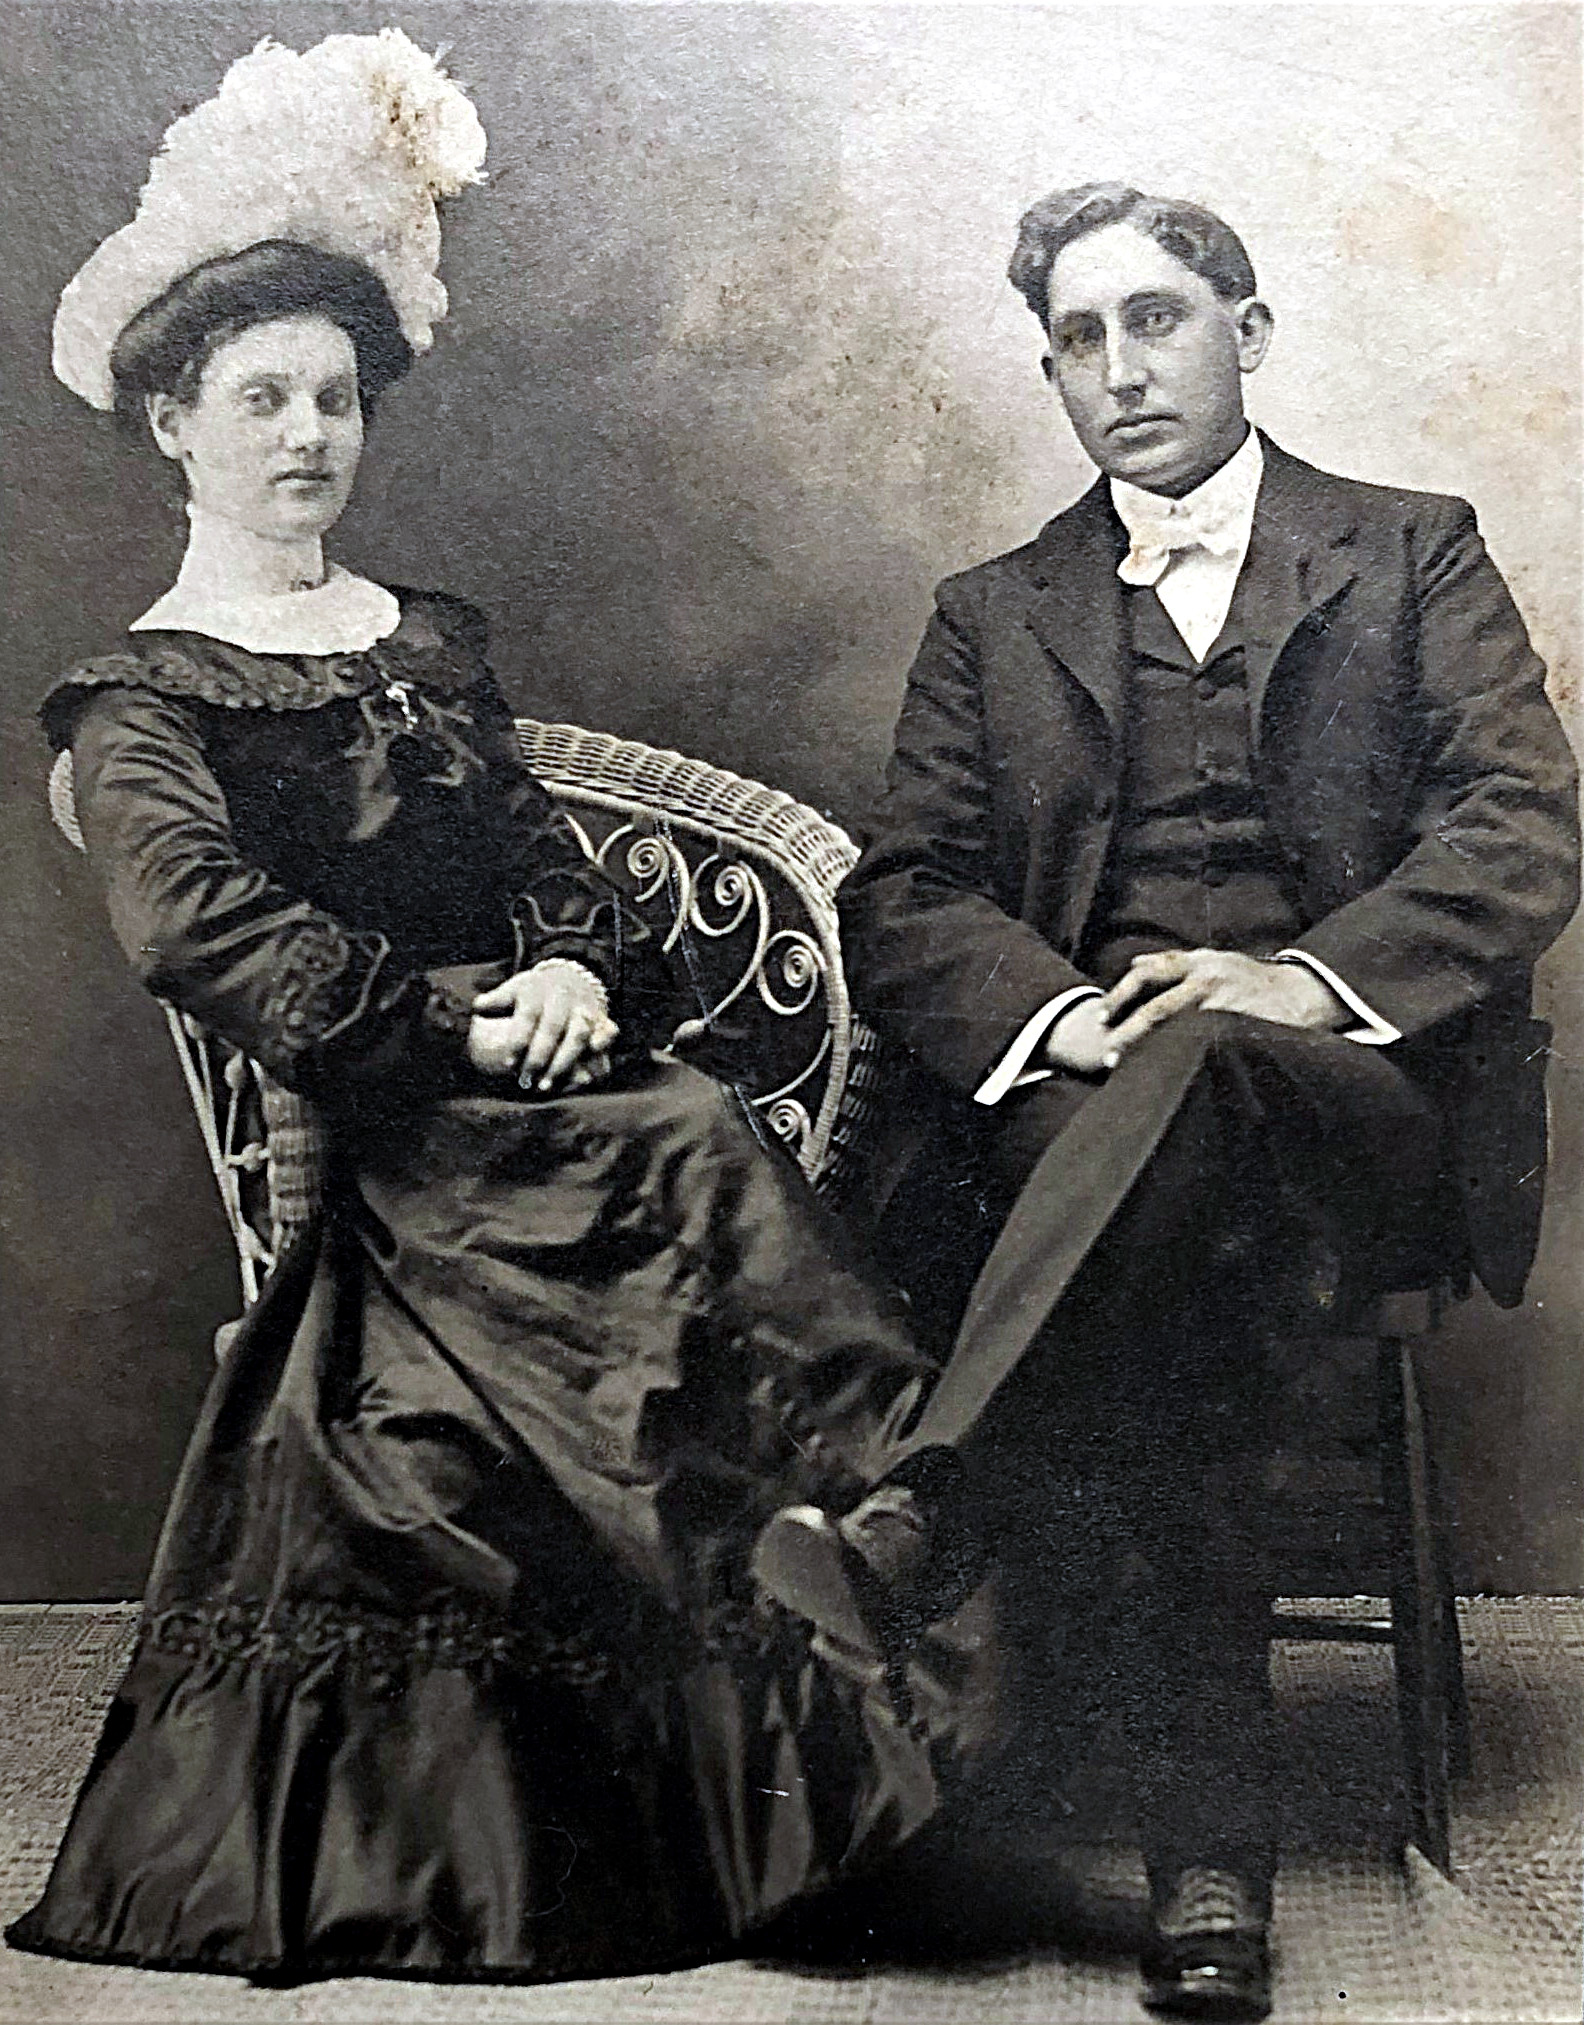 Generation 3. Mary Jane Lias (1880-1948) and Louis F. Huber (1872-1933) - Wedding Picture